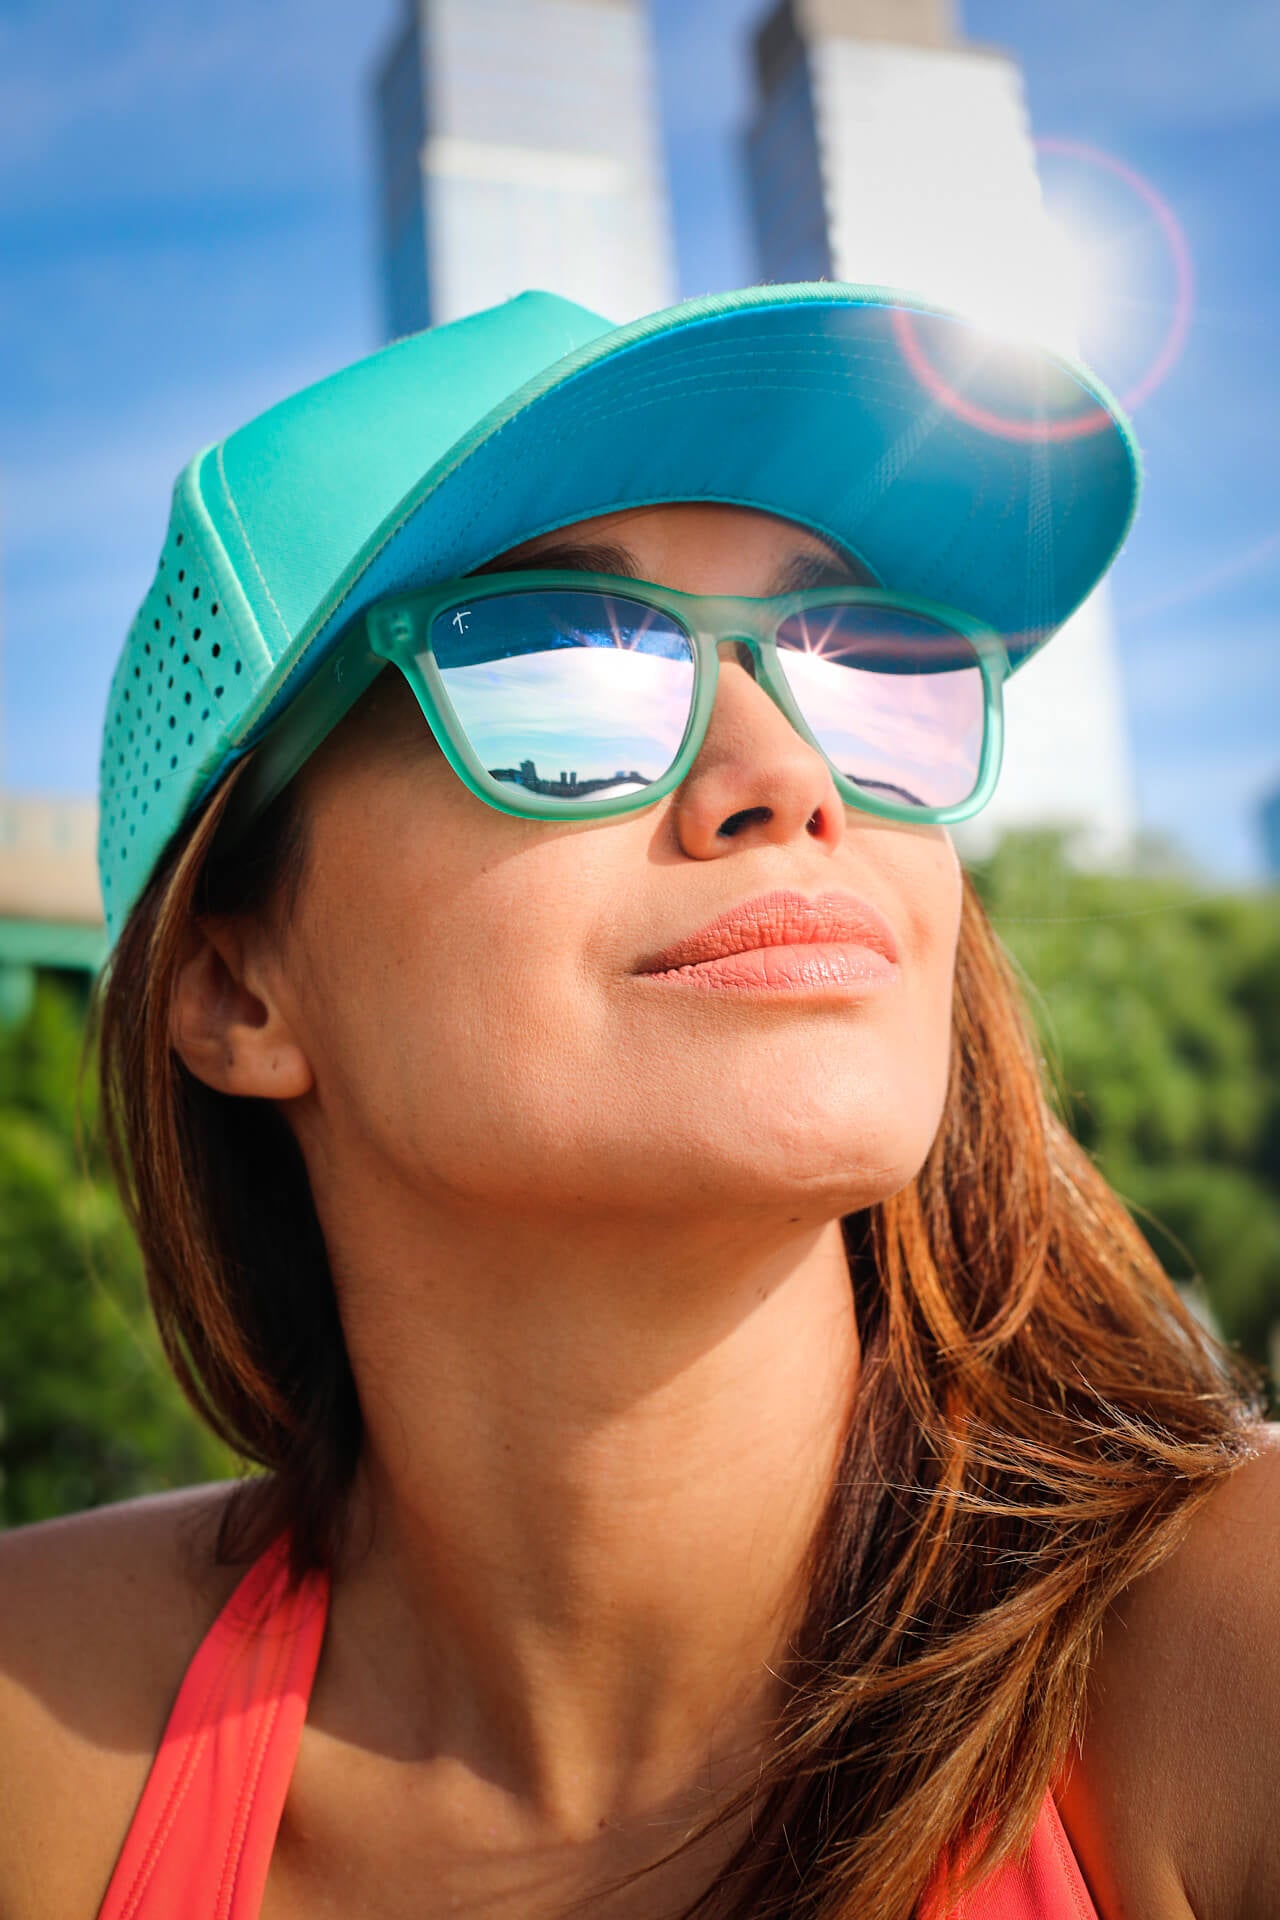 Green mint running sunglasses for runners by Tierra Sunglasses